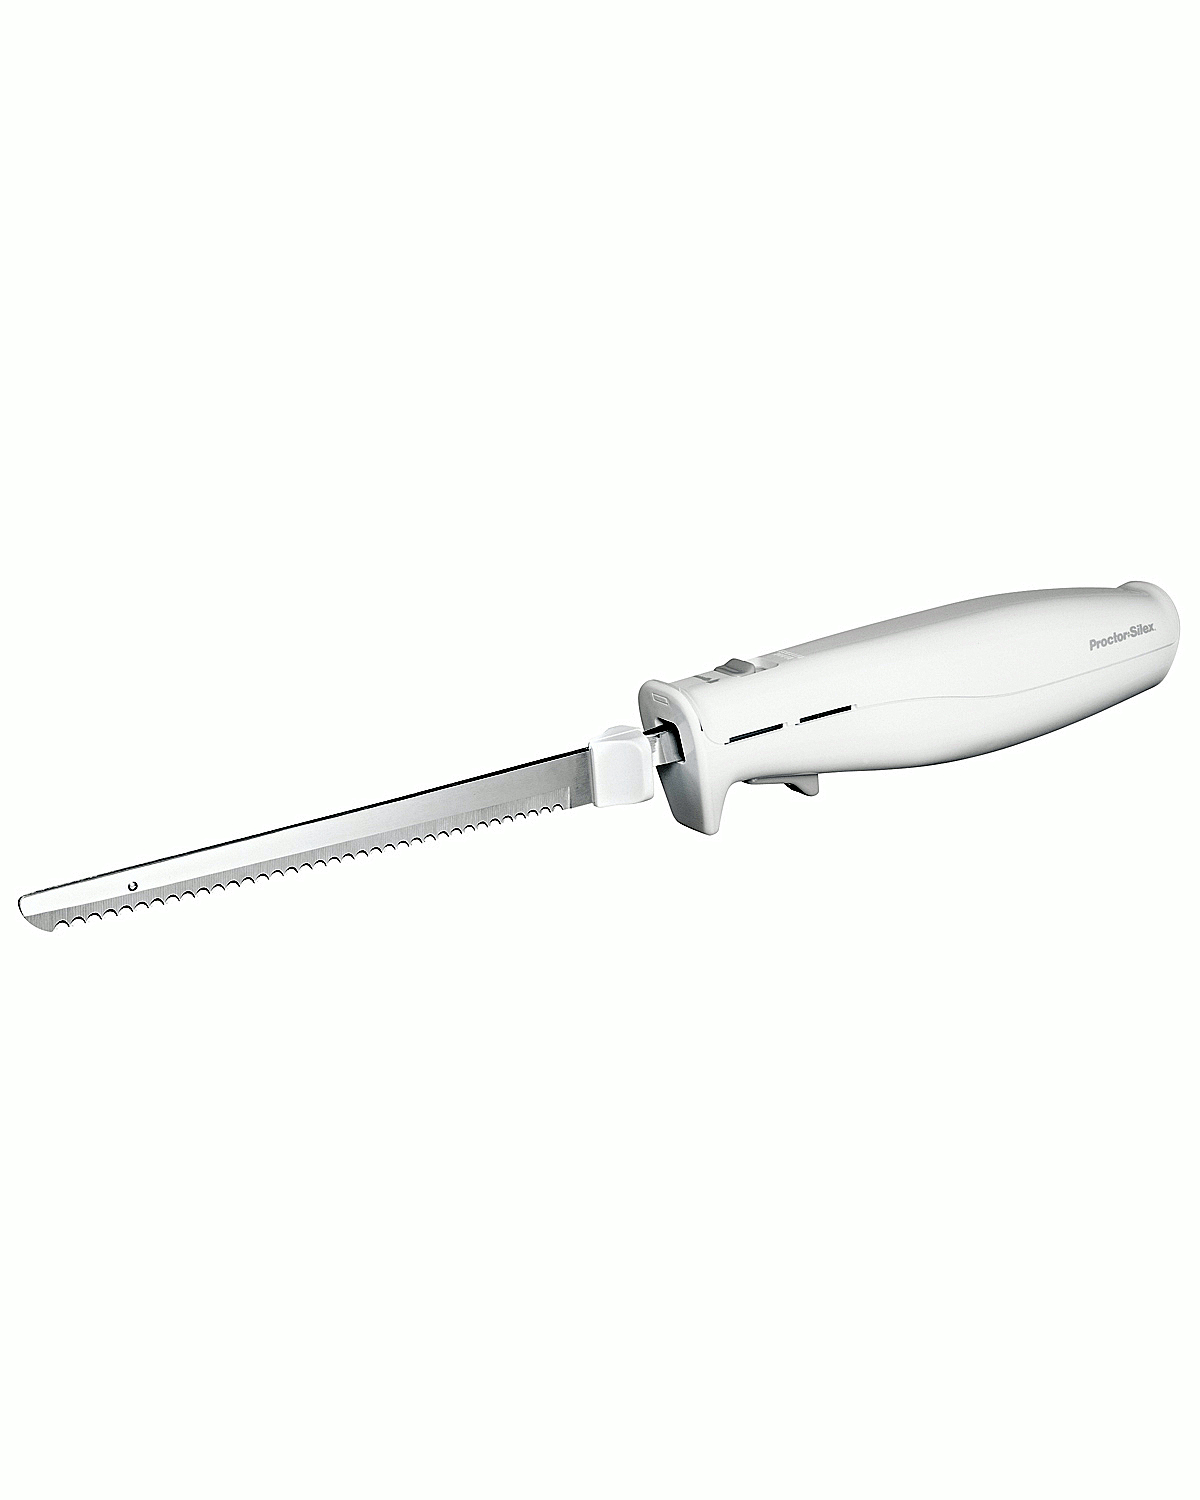 Best Electric Carving Knife: Waring, Black and Decker, Hamilton Beach